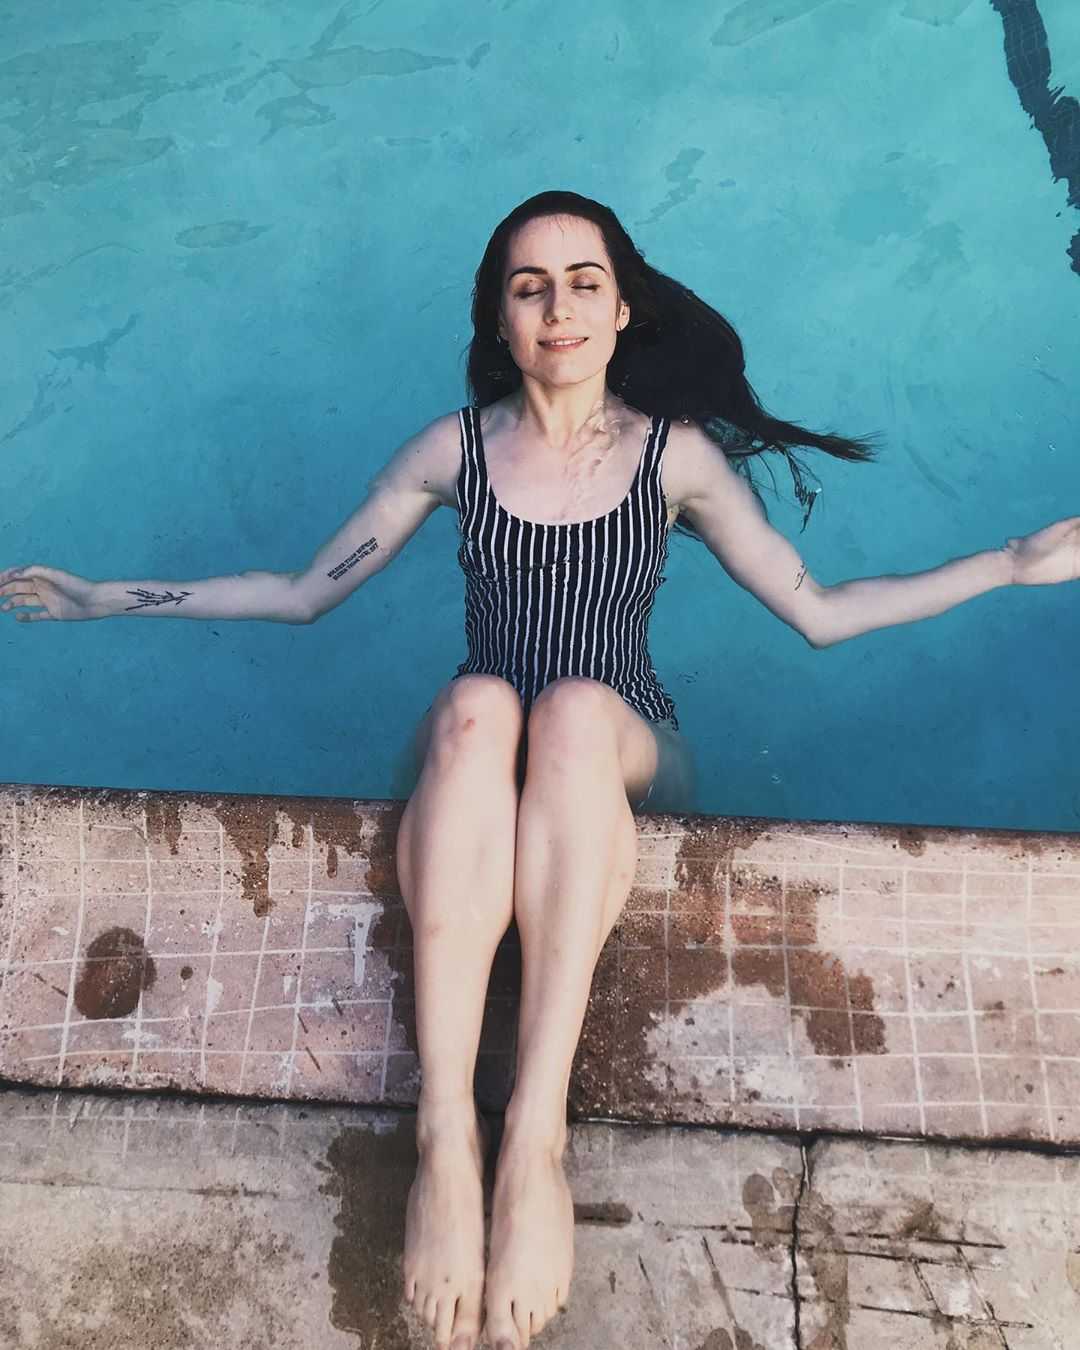 51 Hottest Dodie Big Butt Pictures Demonstrate That She Has Most Sweltering Legs 21